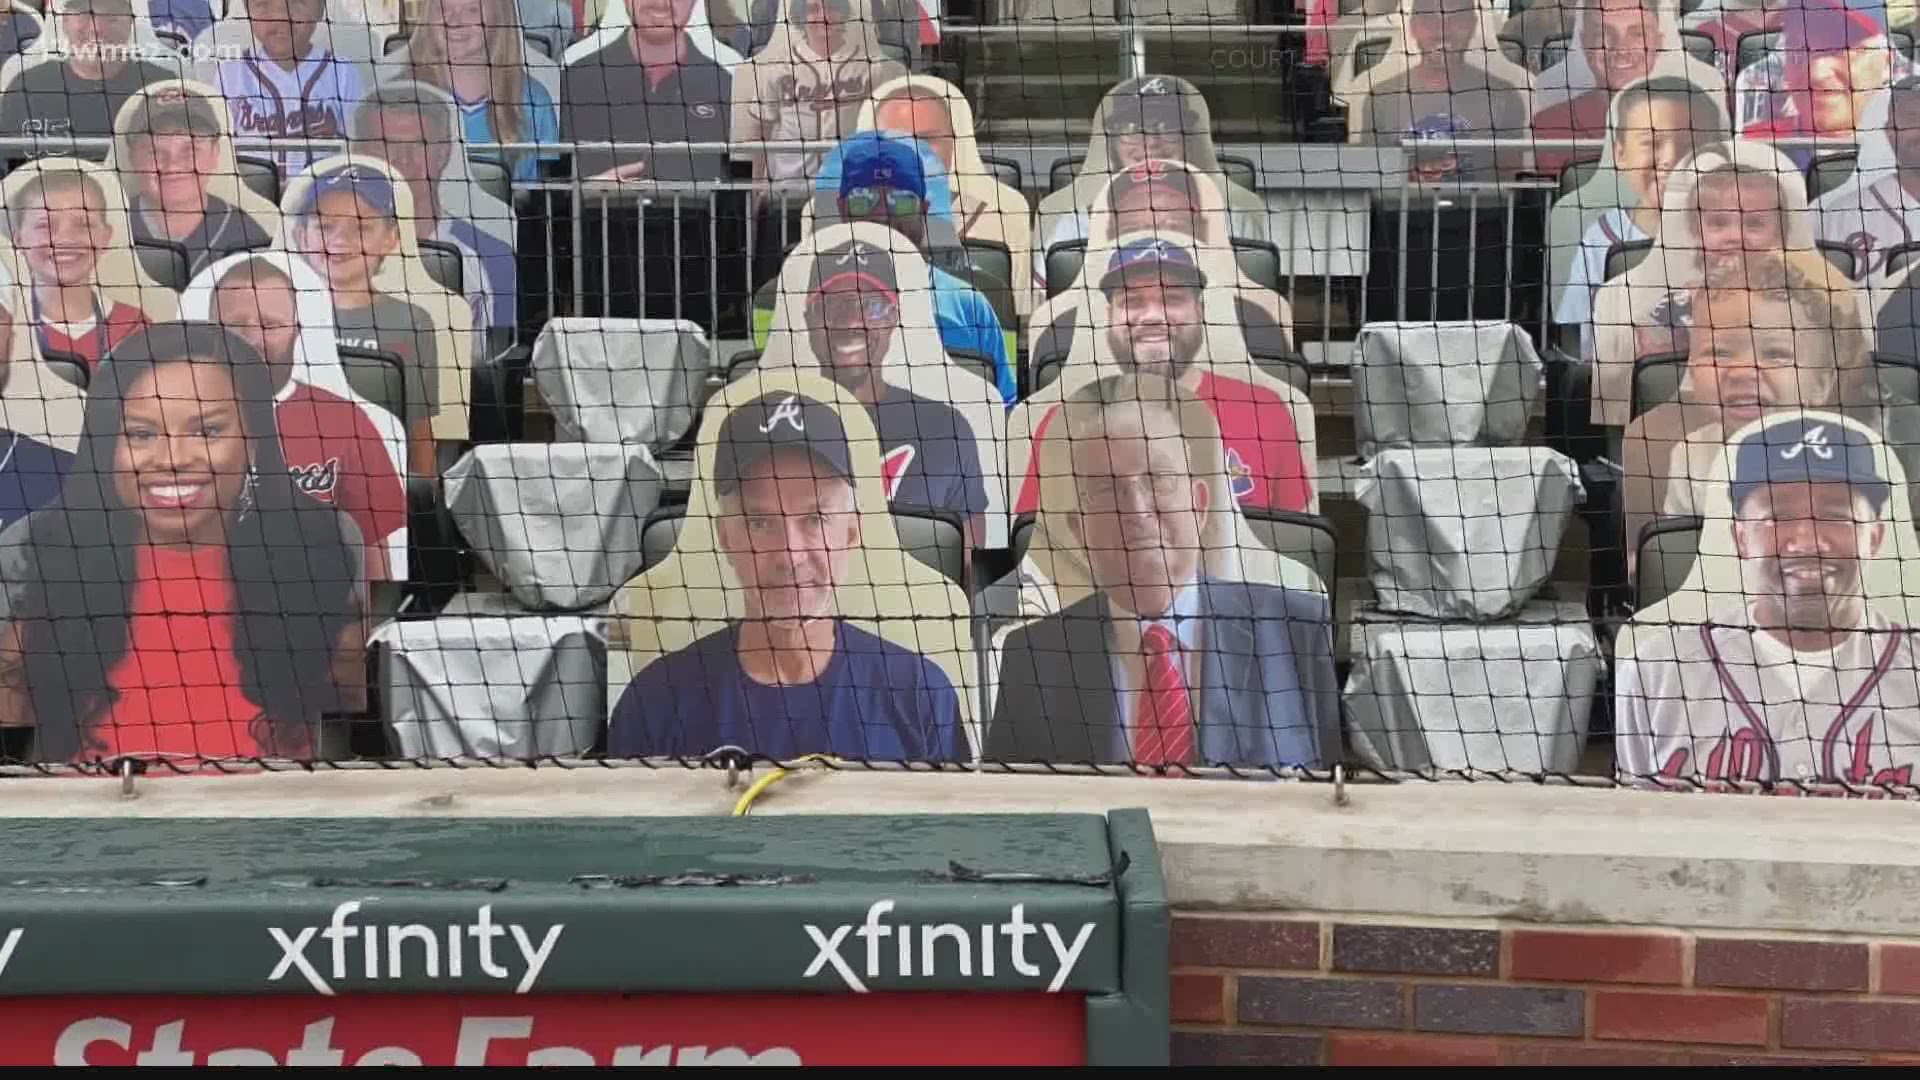 Cutouts of Jeff Batcher and Bobby Pope will sit behind home plate at Truist Park through September 24